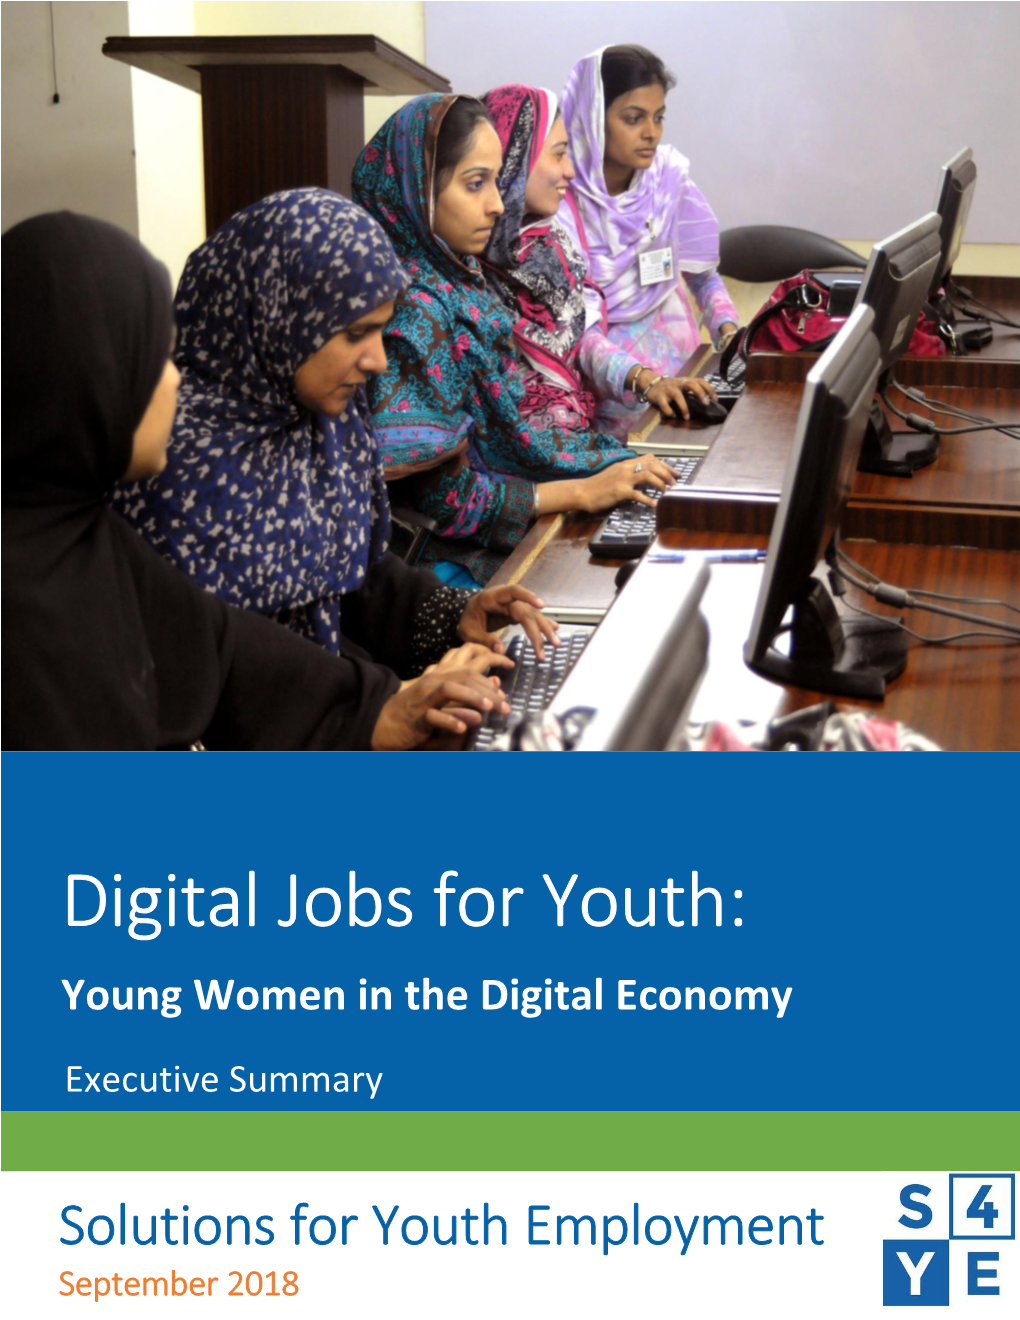 Digital Jobs for Youth